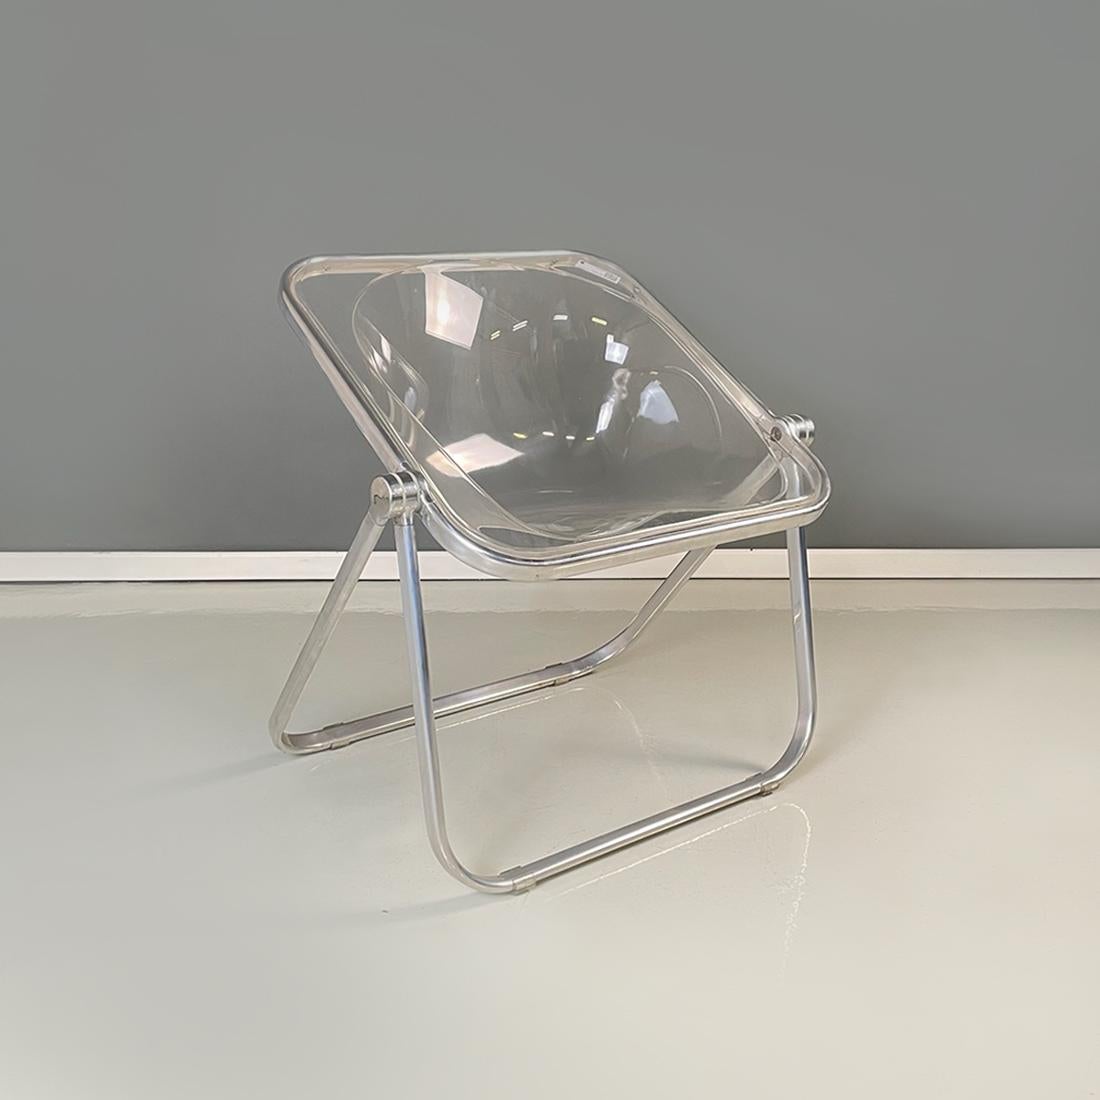 Italian modern transparent plastic and aluminum pair of Plona armchairs by Giancarlo Piretti for Anonima Castelli, 1969.
Pair of Plona model armchairs with aluminum tube structure and monocoque seat and back in transparent plastic. Foldable and